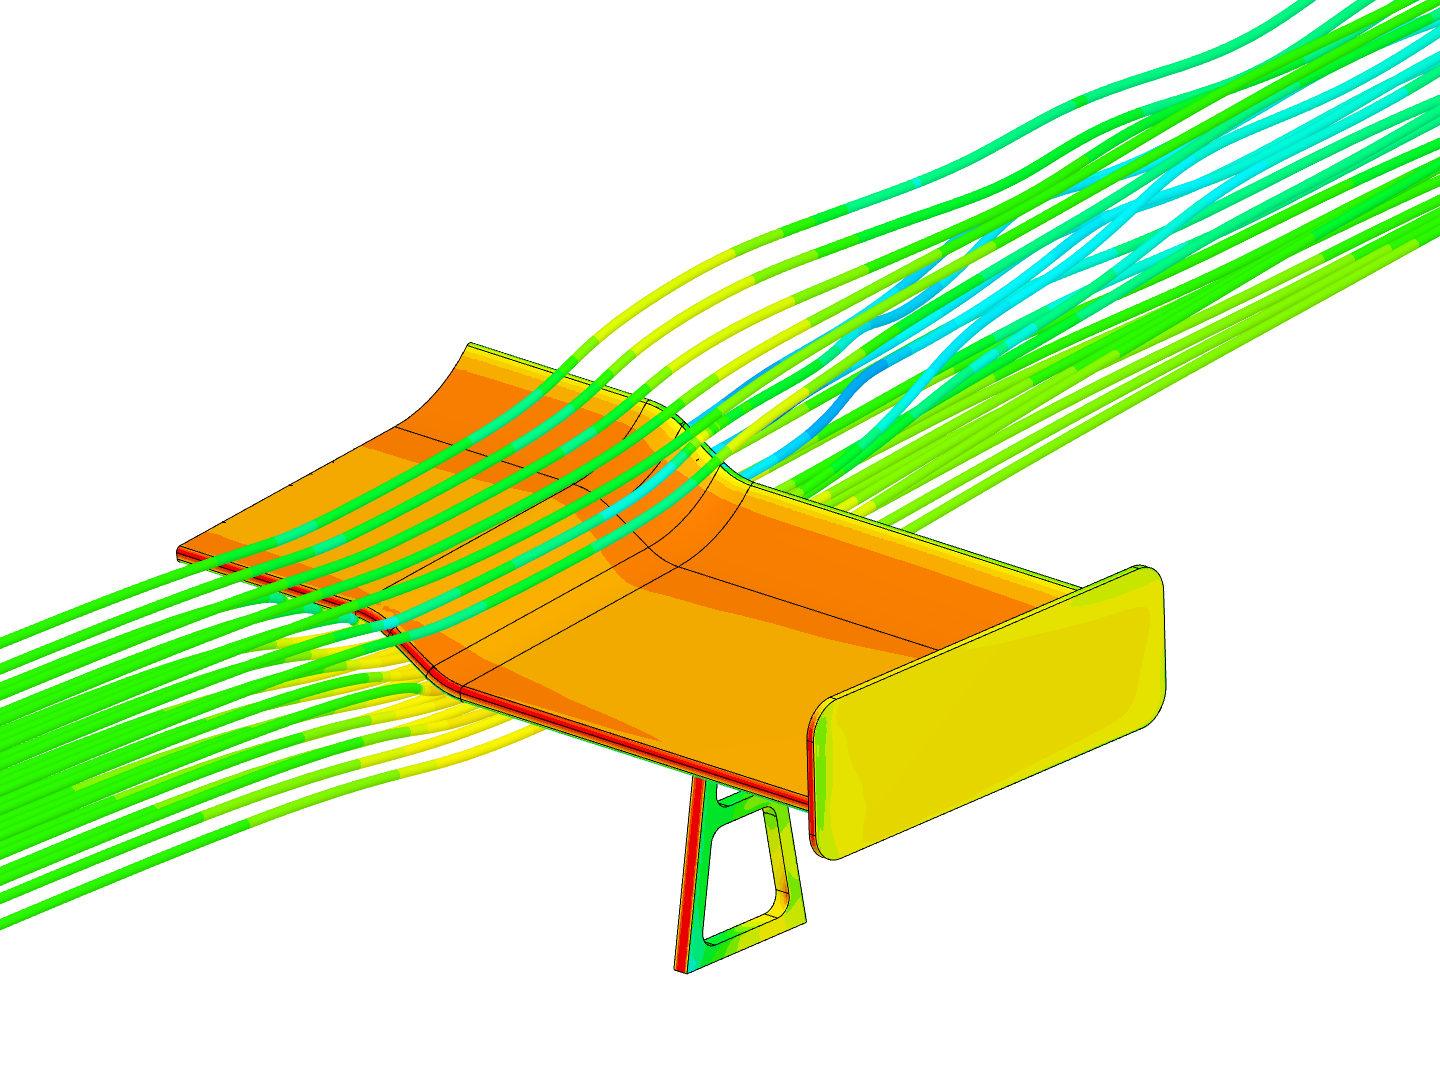 Airflow of a GT car image